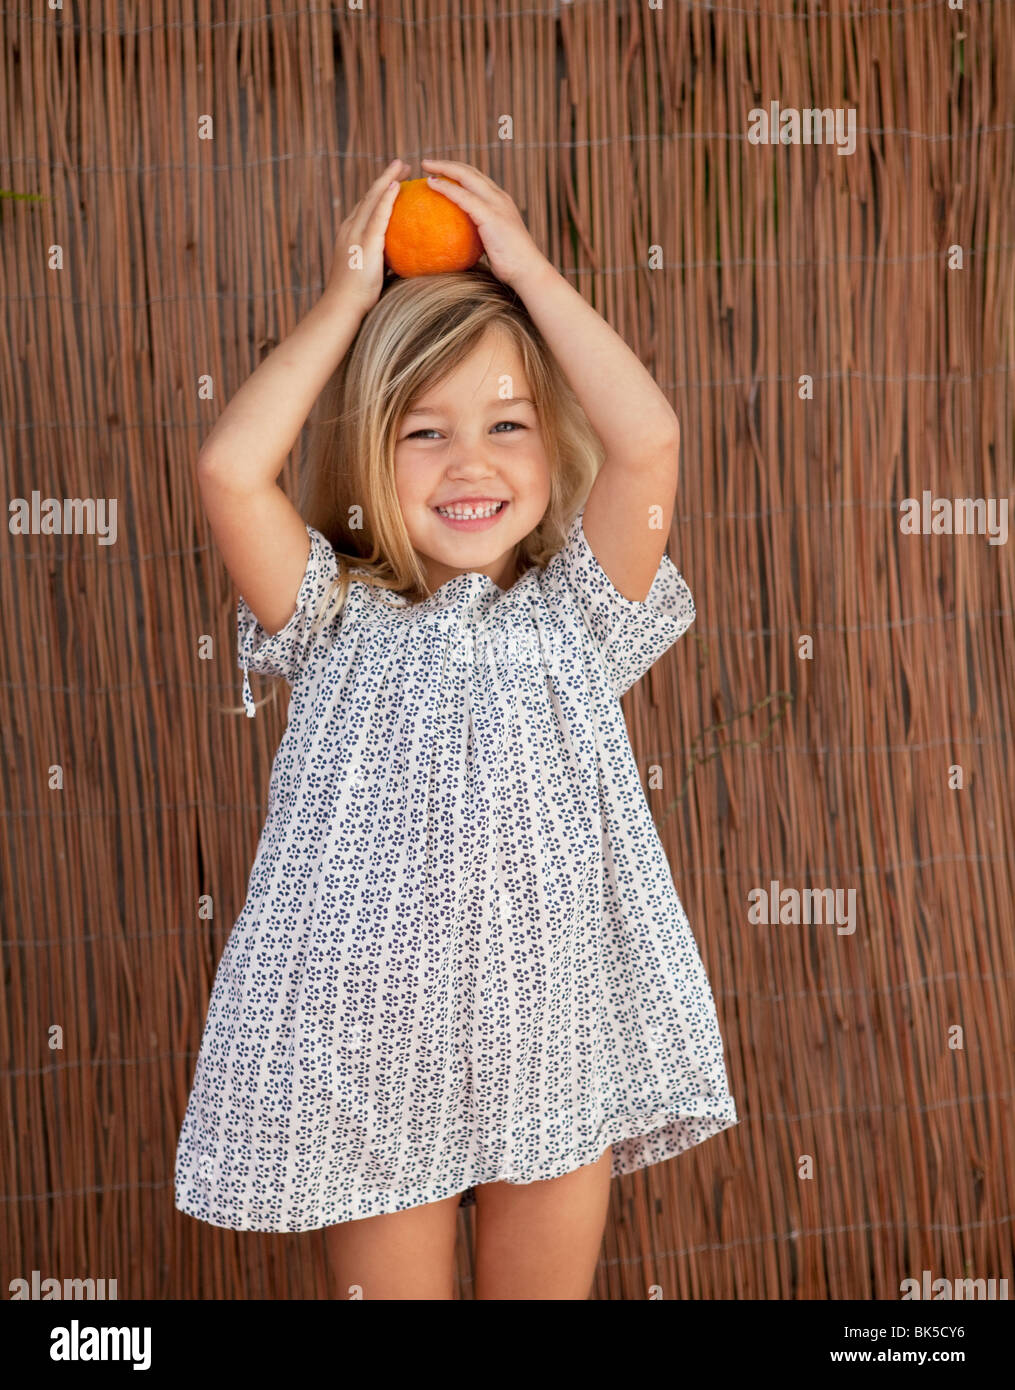 Young girl in sun dress holding an orange on her head Stock Photo